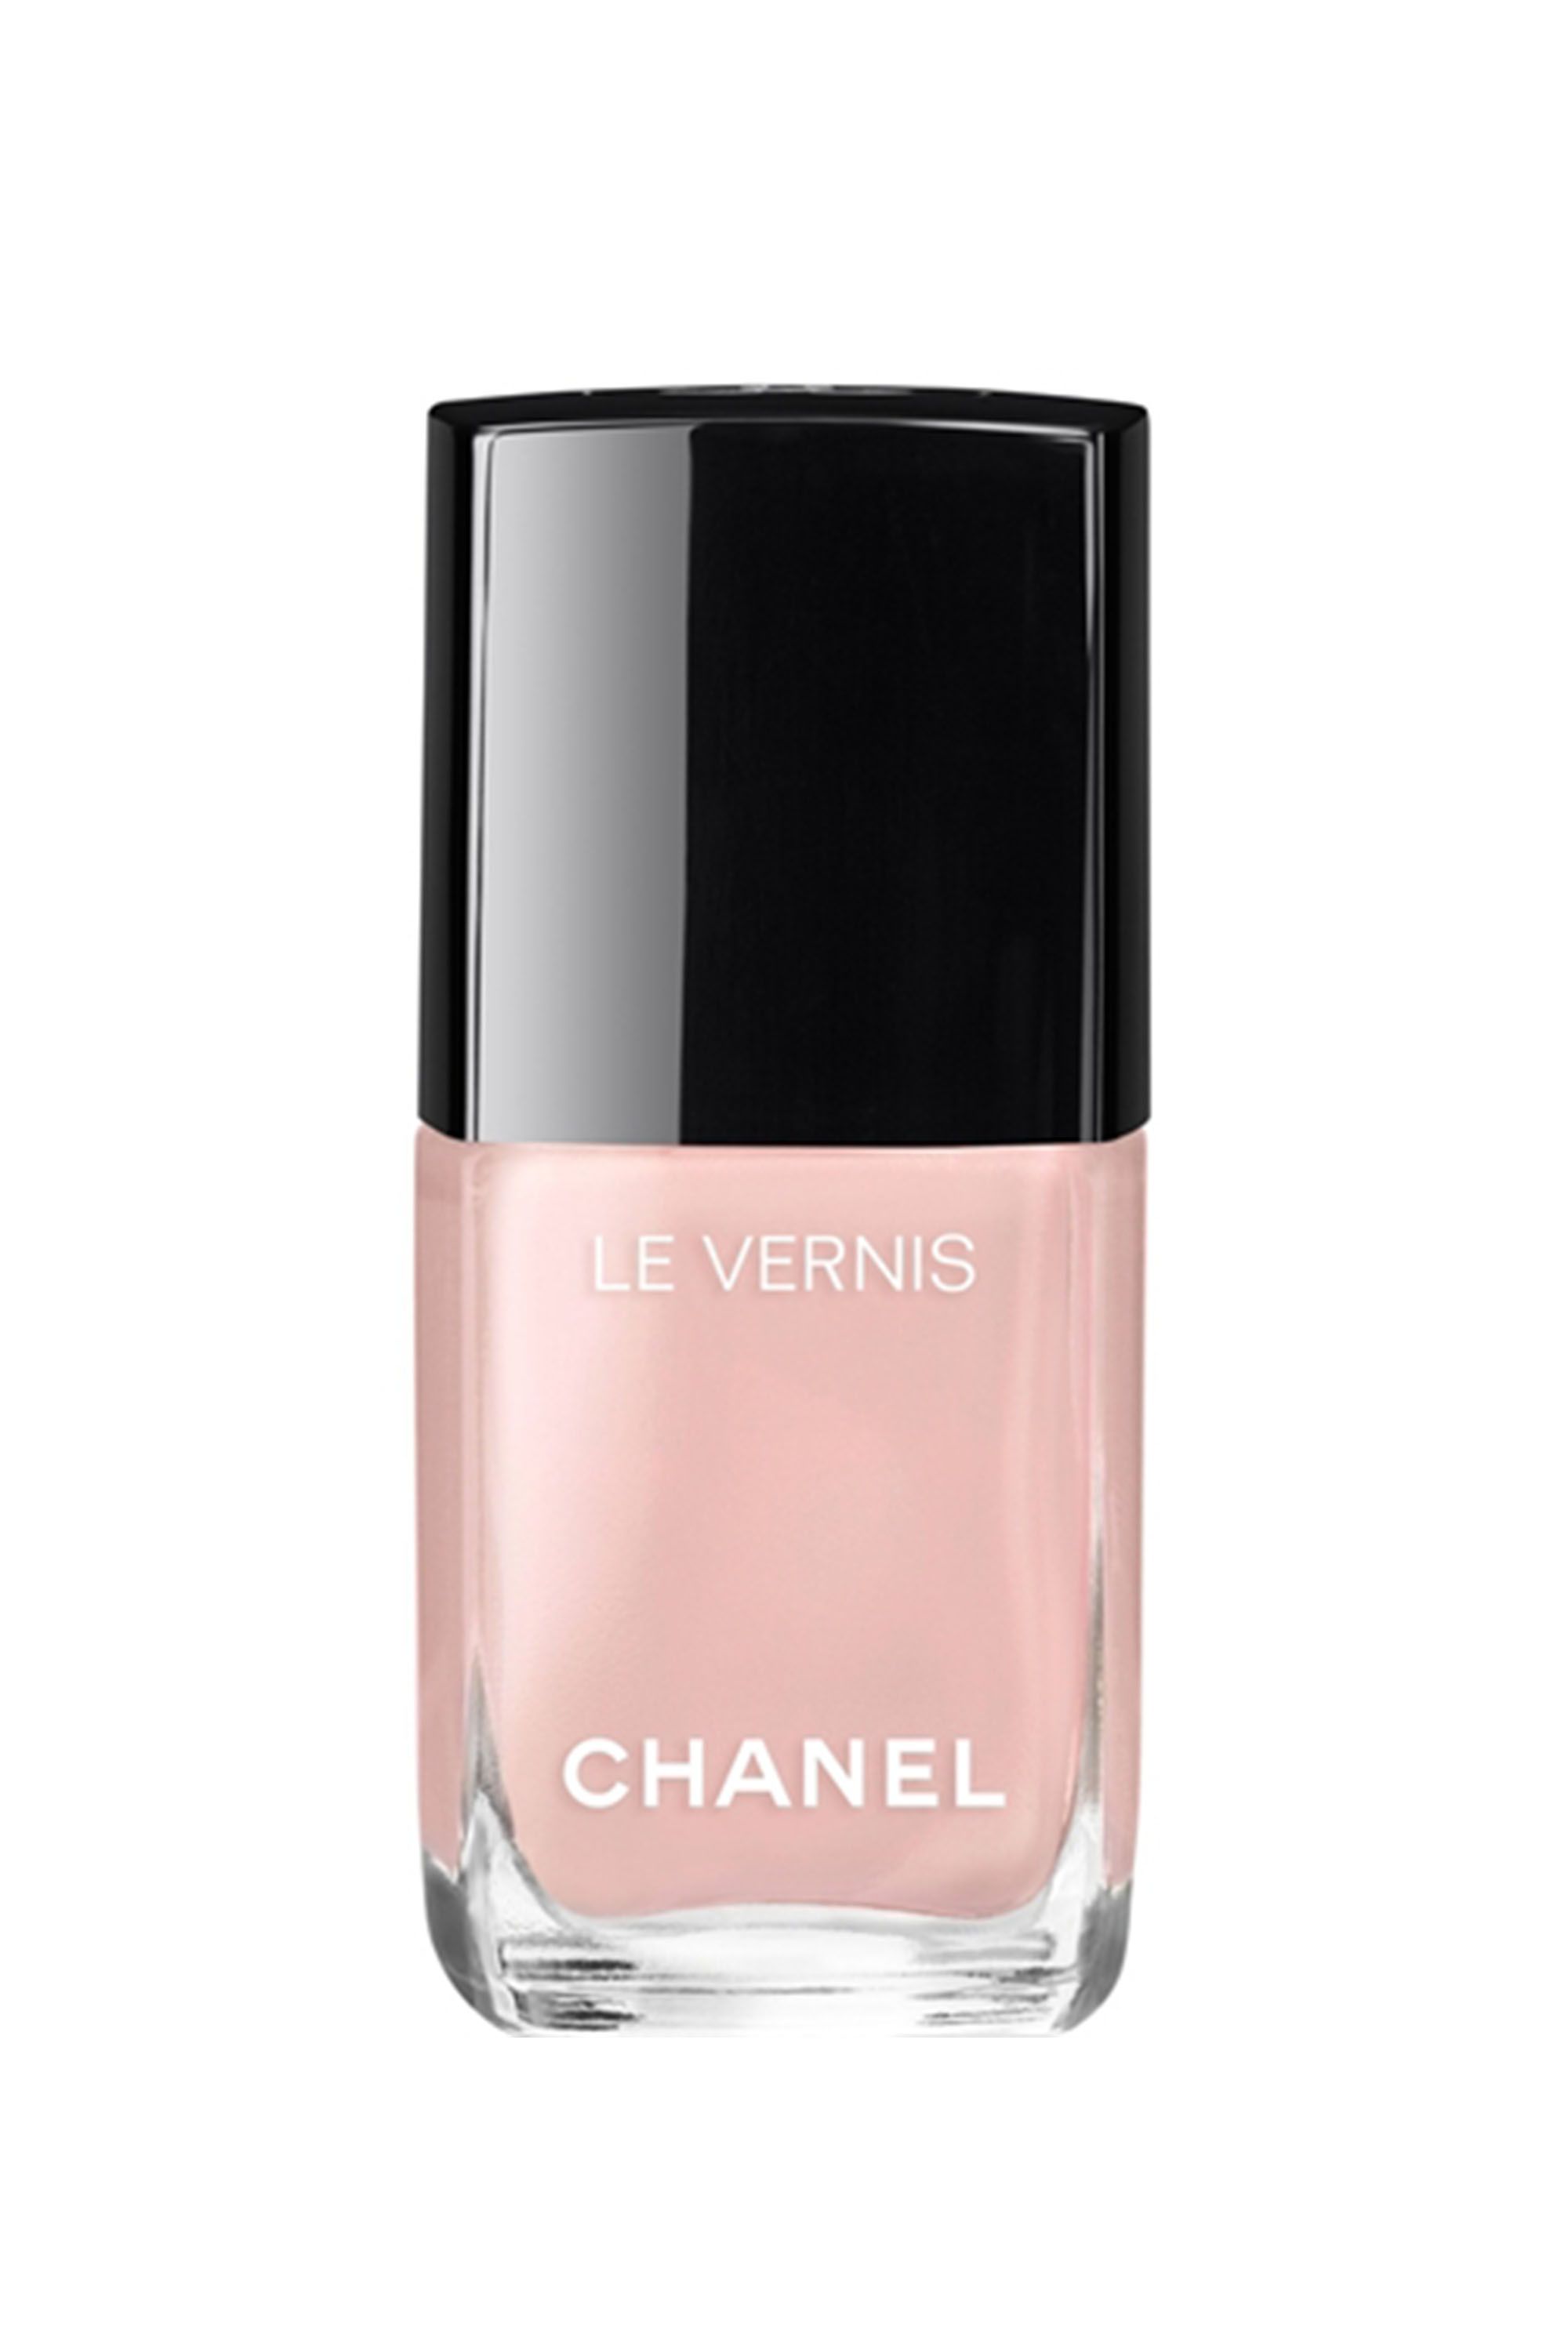 Chanel Nail Polishes in Taboo, Black Pearl, and Blue Satin - One Starry  Night